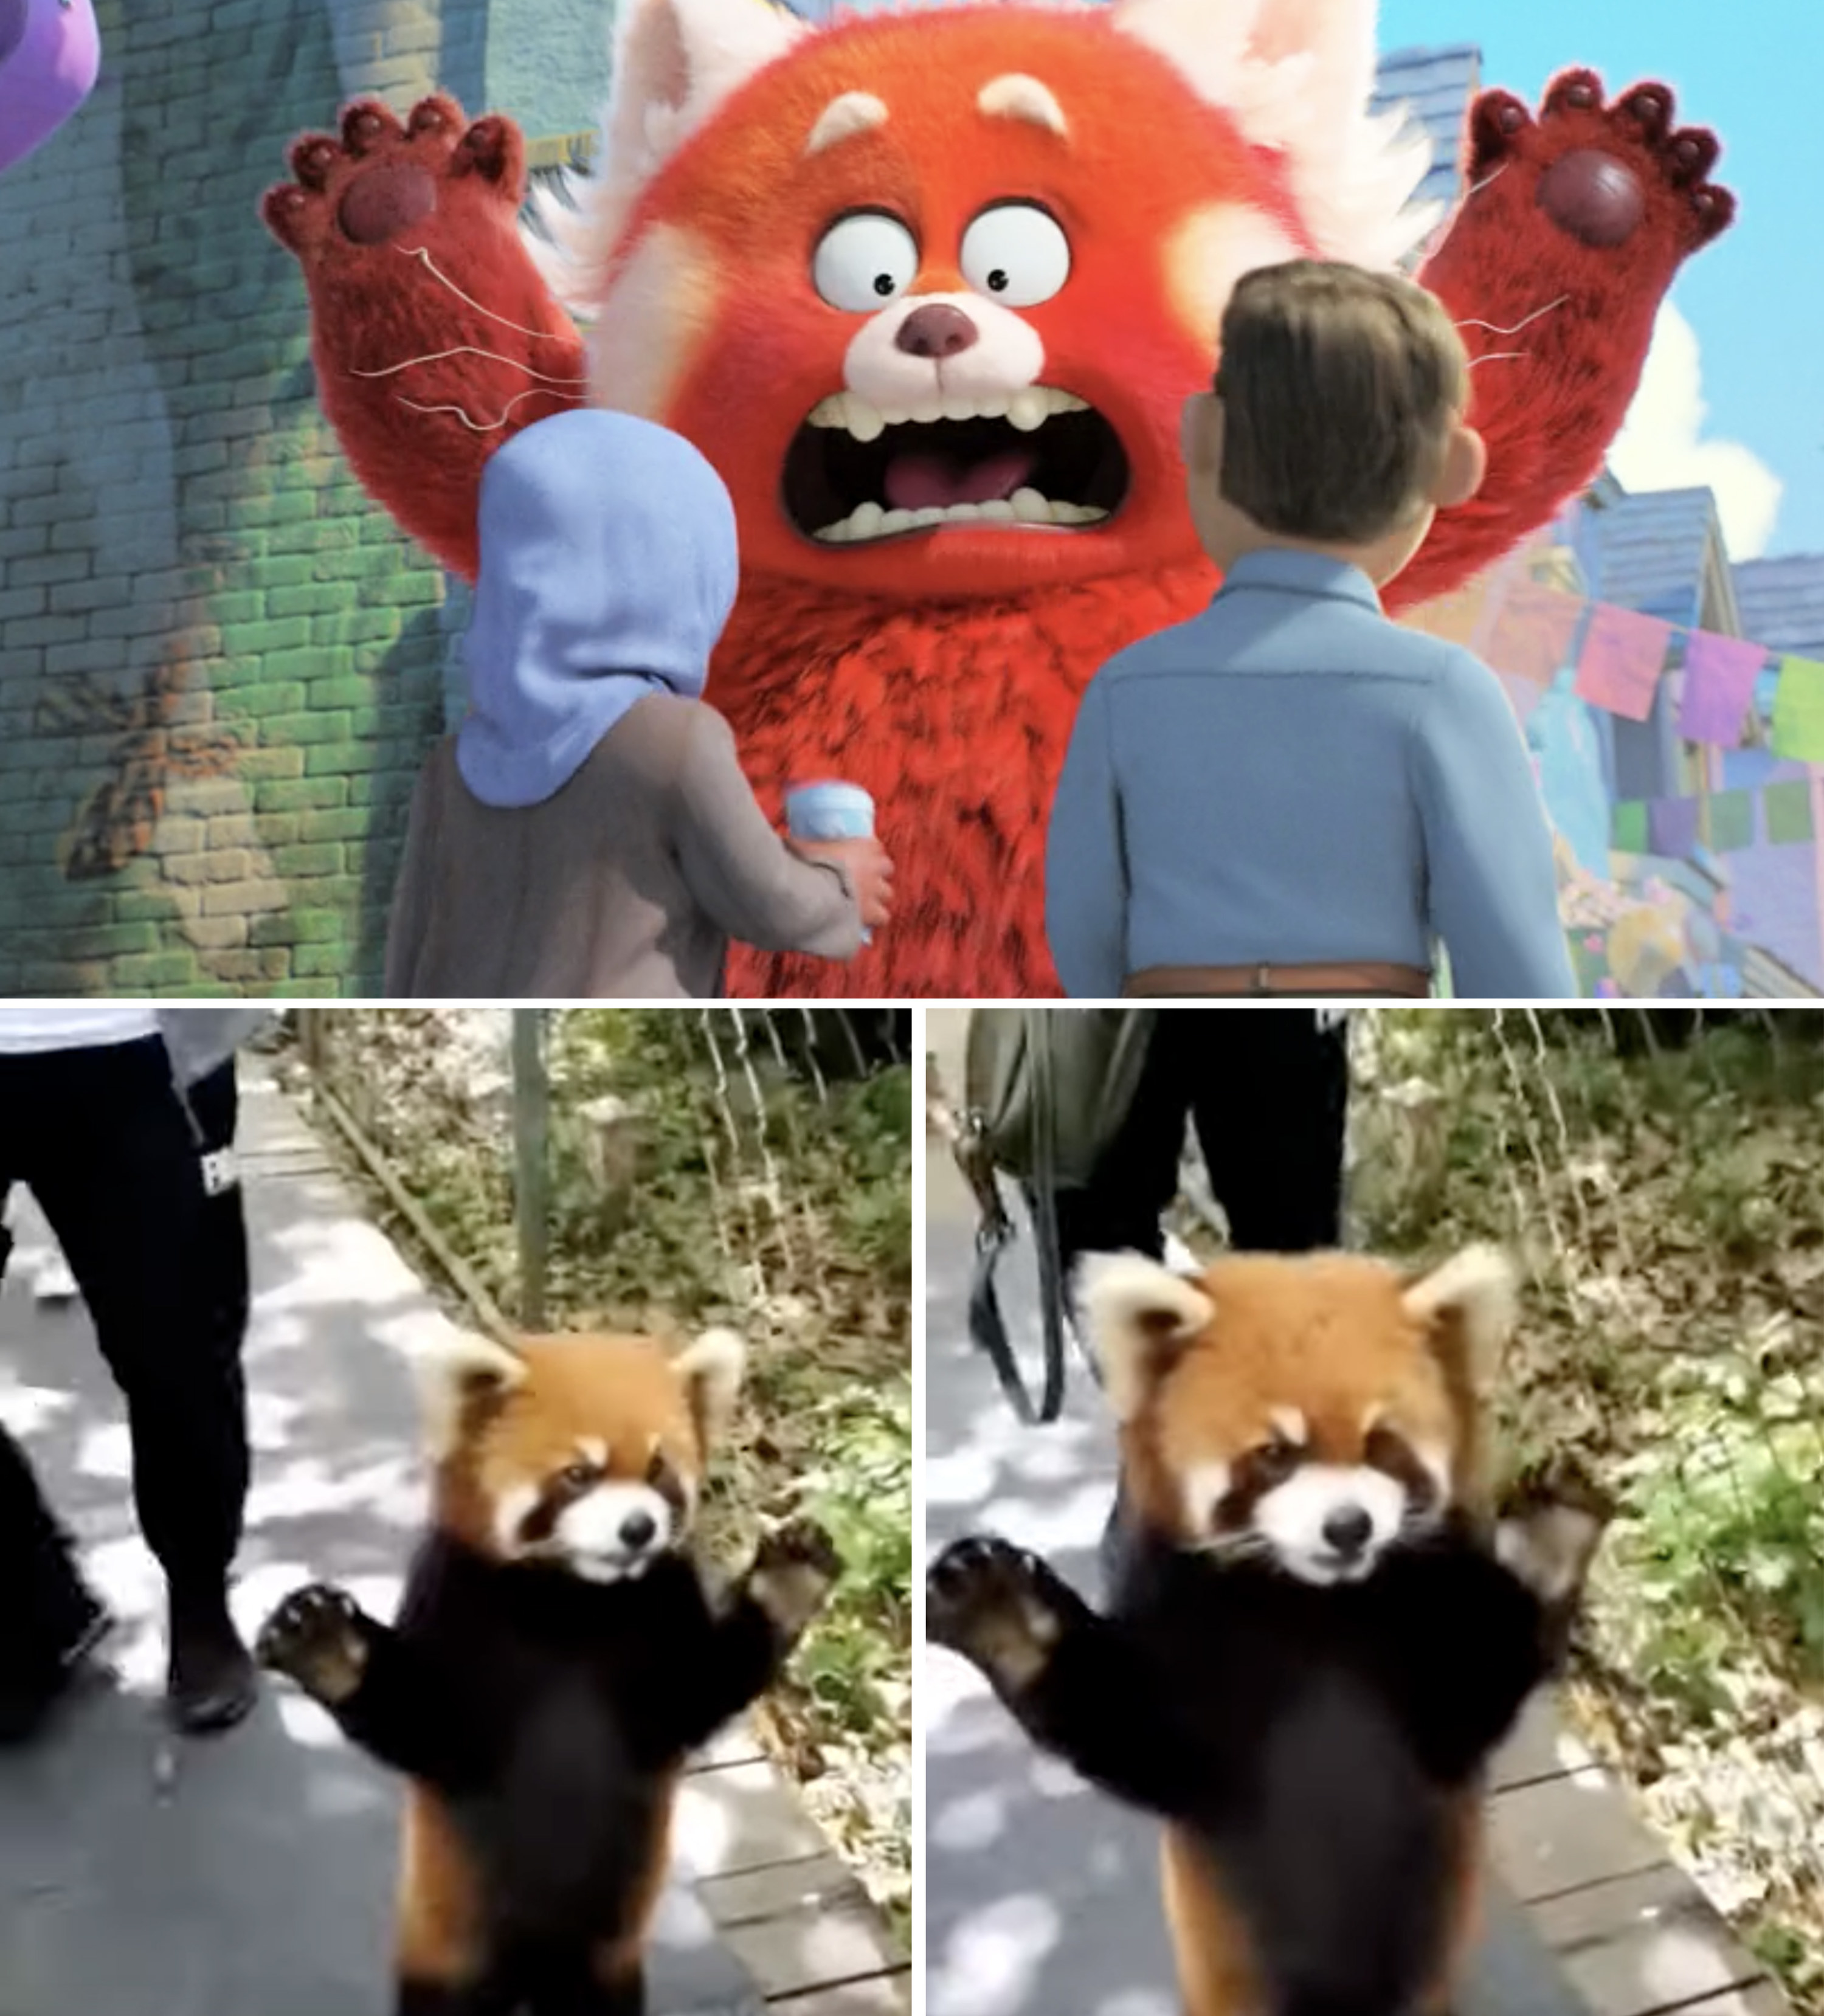 Mei holding her hands in the air vs a real red panda doing the same thing